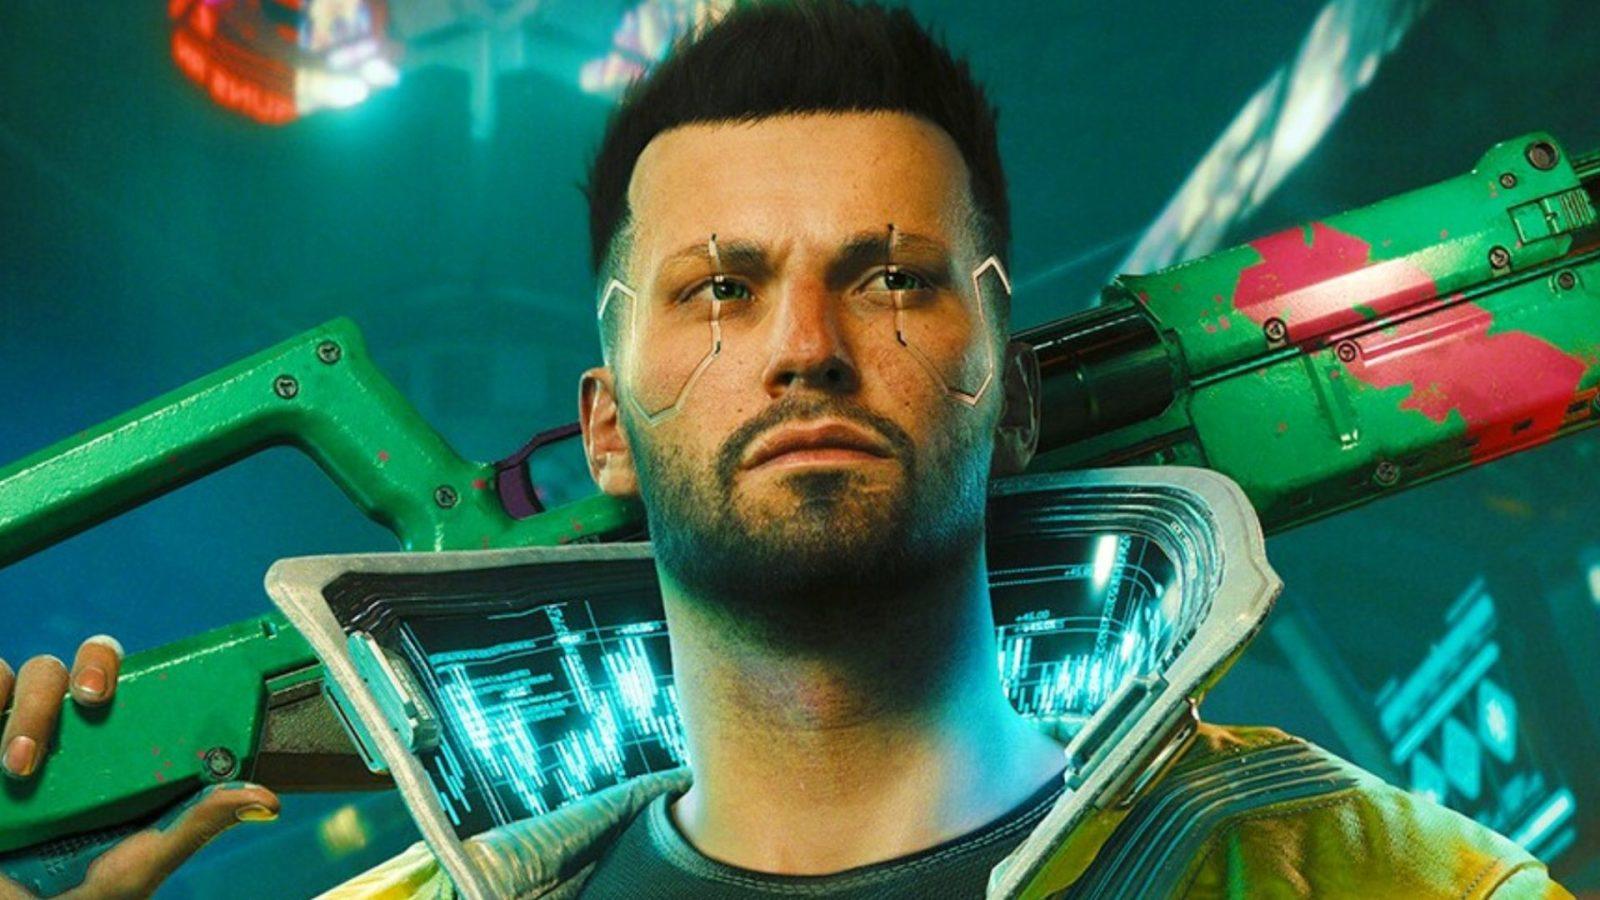 Cyberpunk 2077's Core Mods Have Been Updated to Work With Phantom Liberty